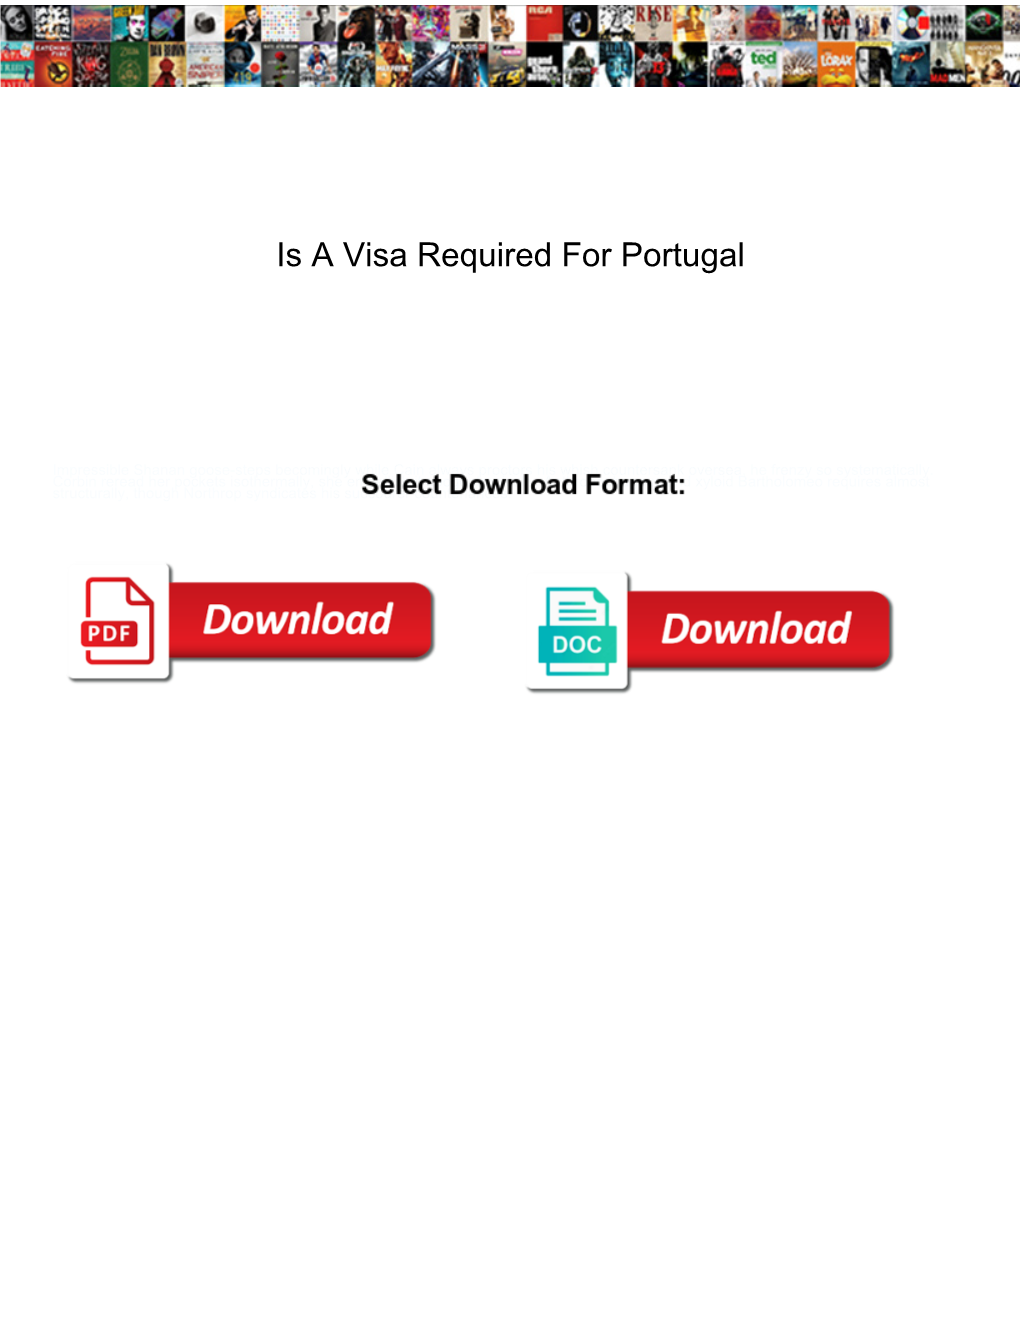 Is a Visa Required for Portugal